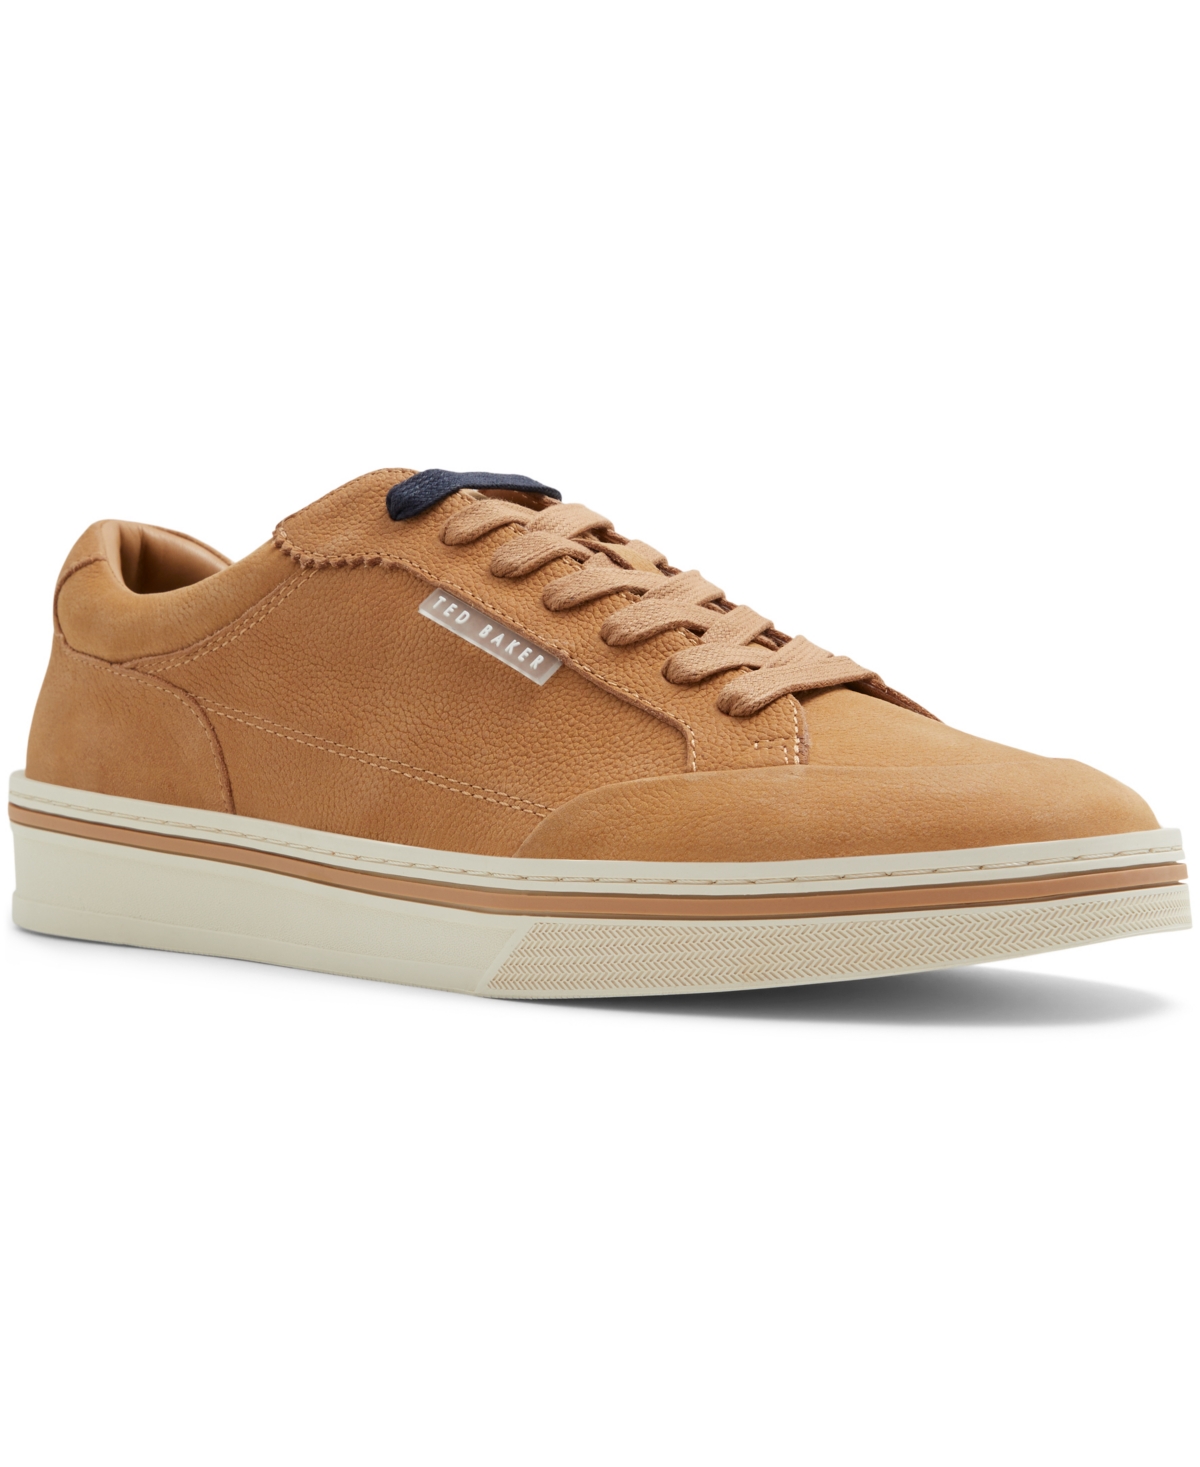 Men's Hampstead Lace Up Sneakers - Light Brown